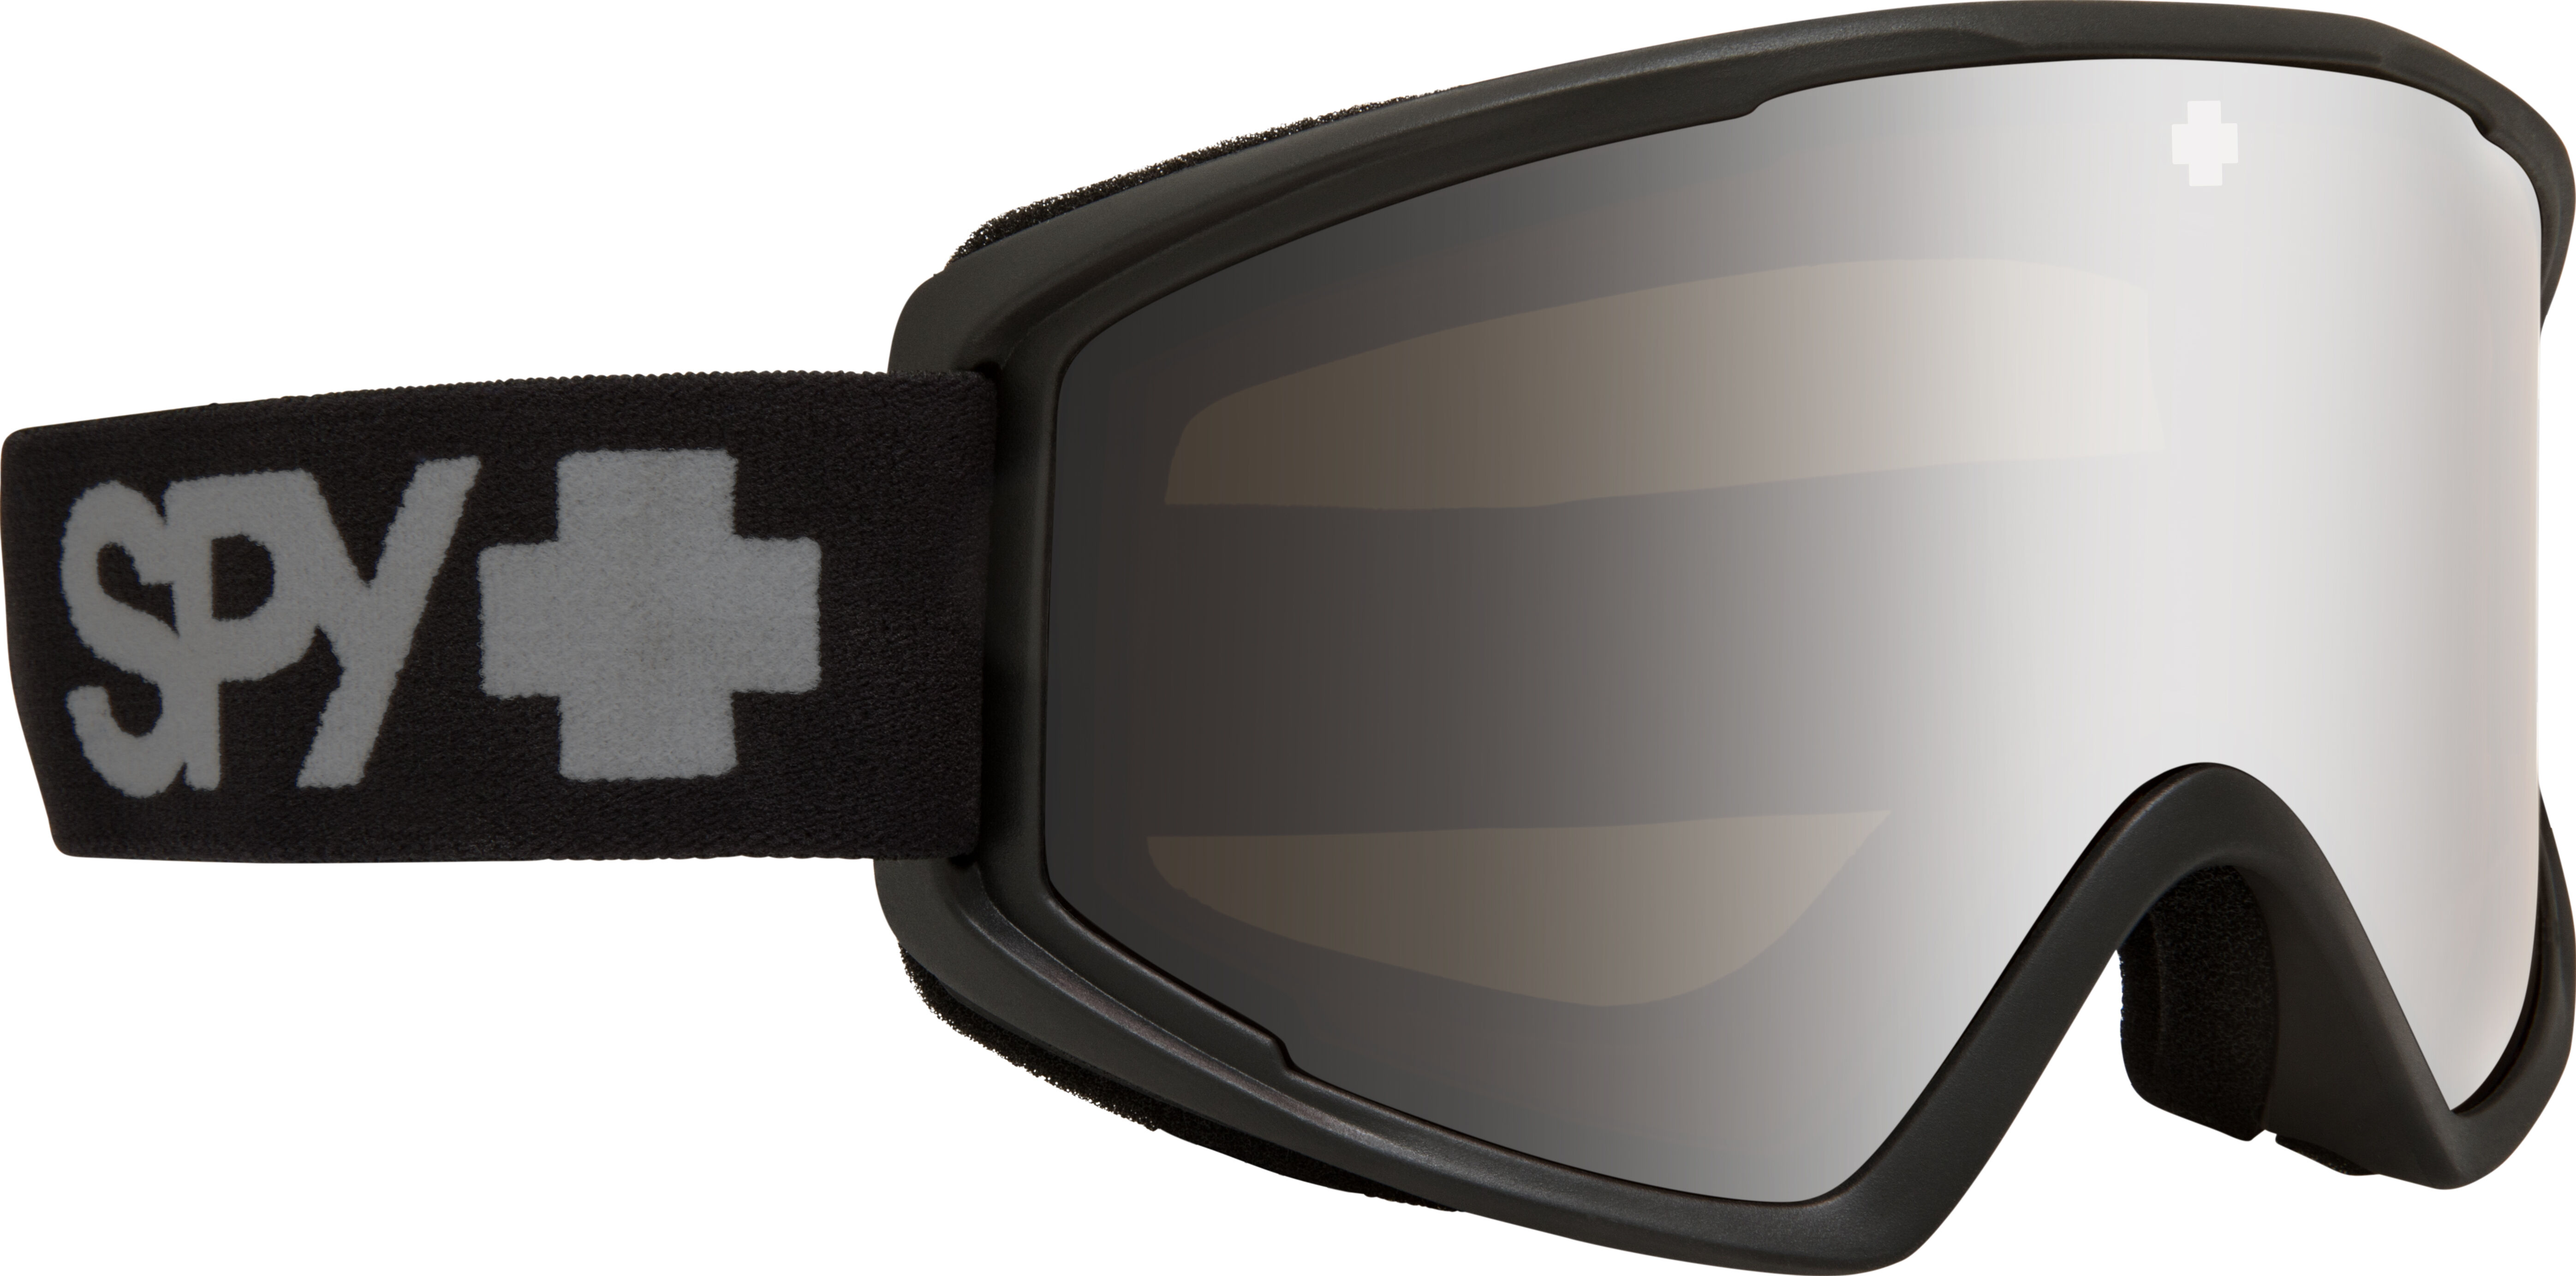 CRUSHER ELITE Snow Goggles by Spy Optic